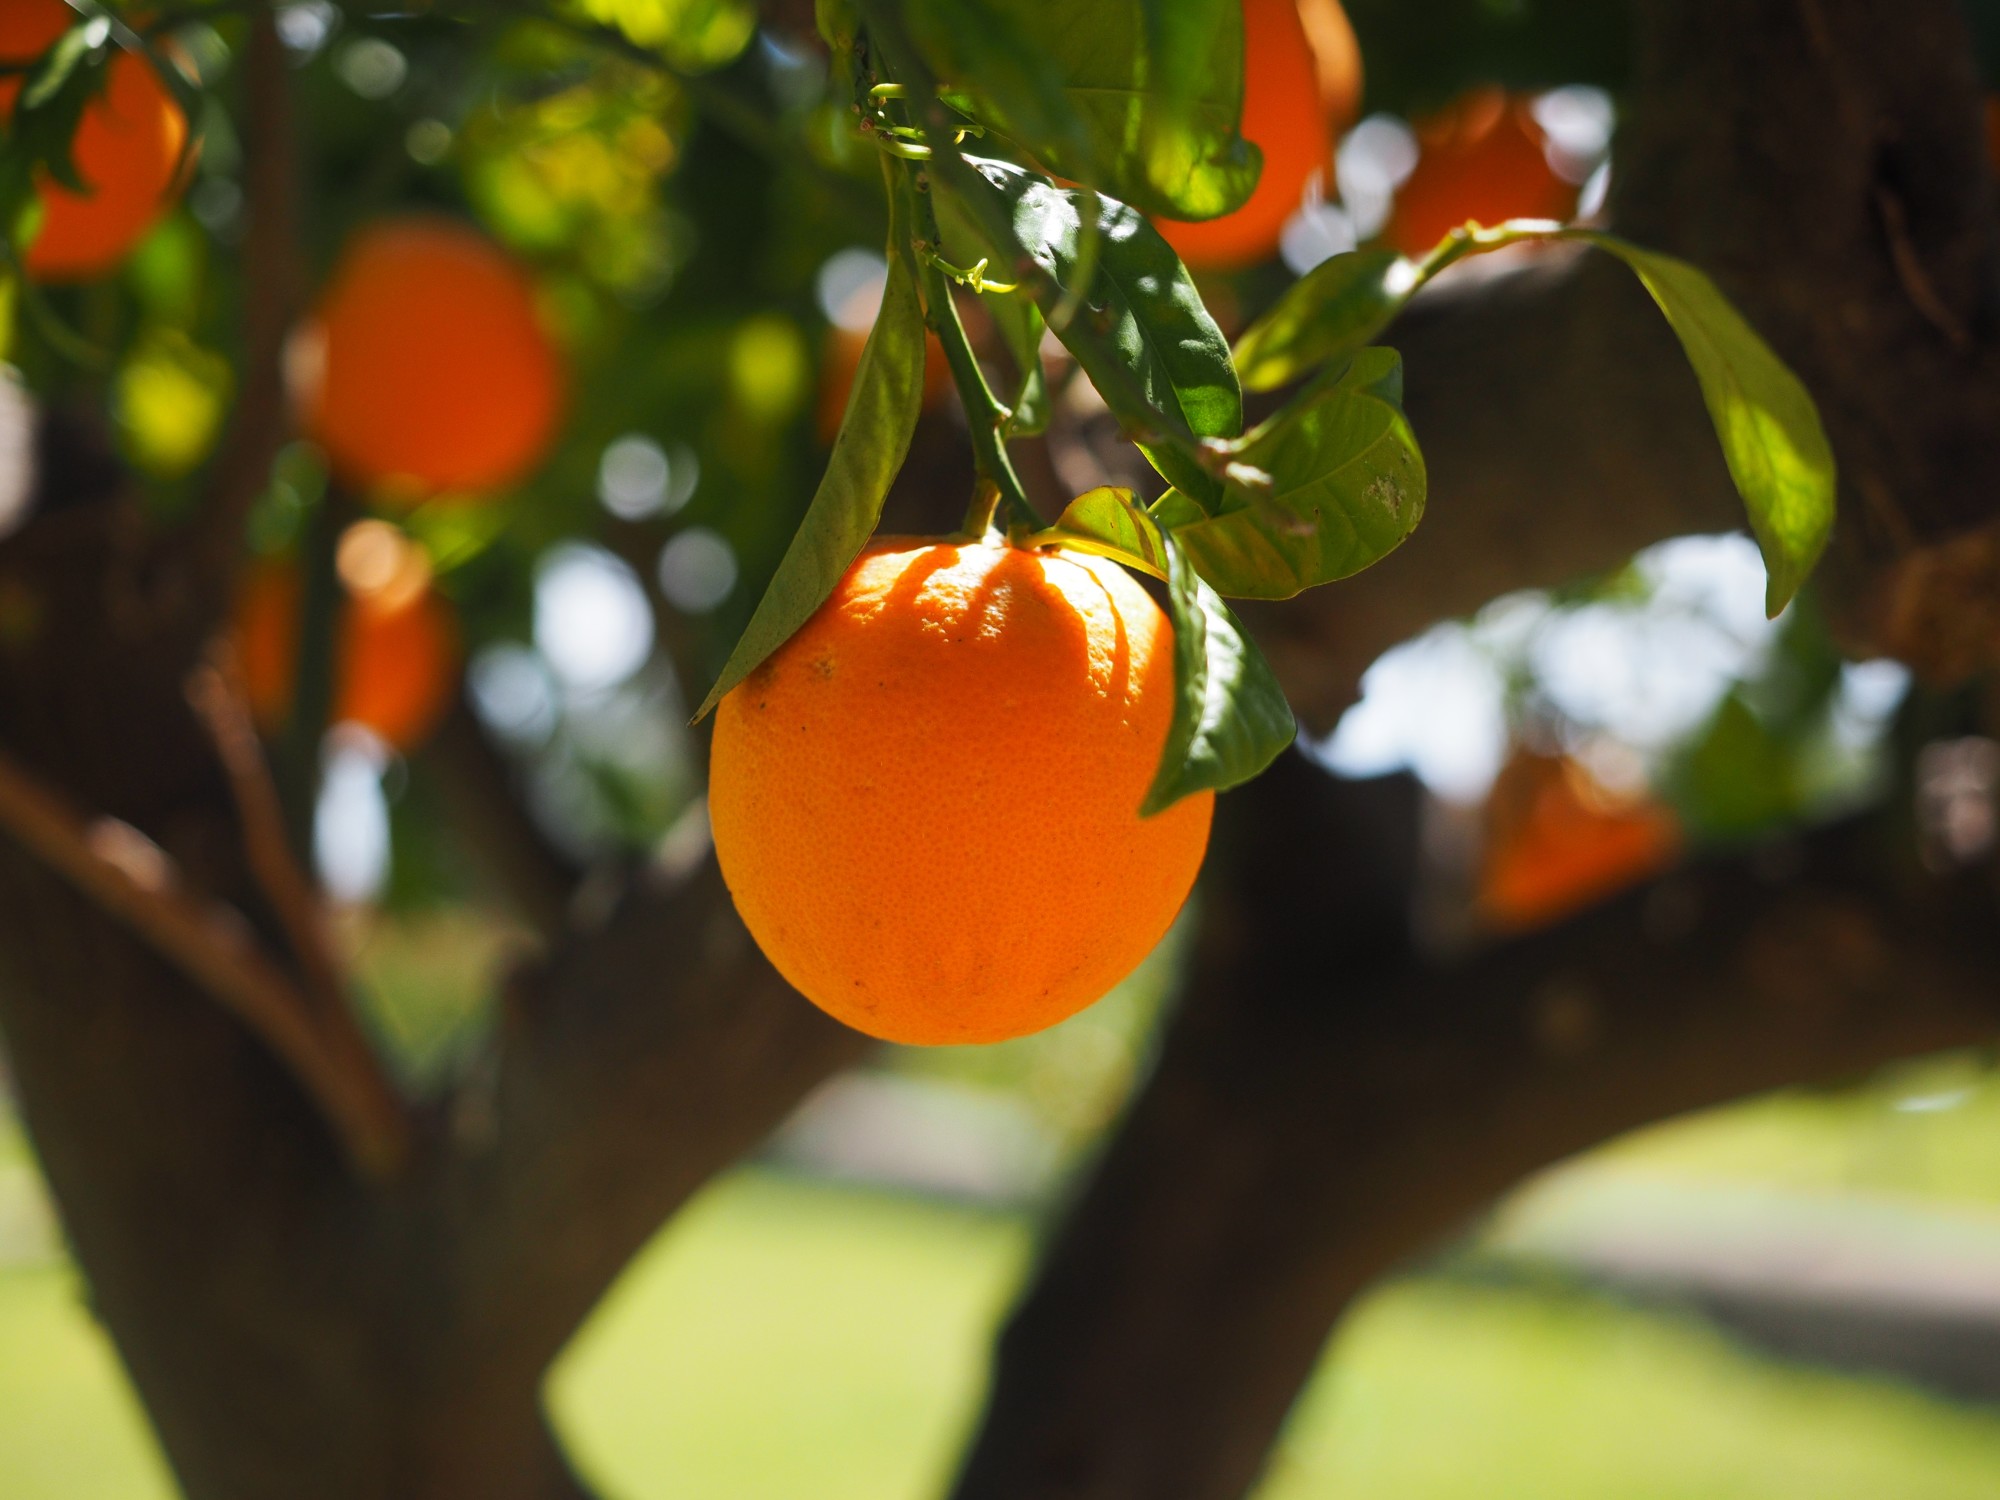 What are the best tree fertilizer products to keep fruit shrubs healthy? Read this guide to learn which brands are best and how to use them effectively.